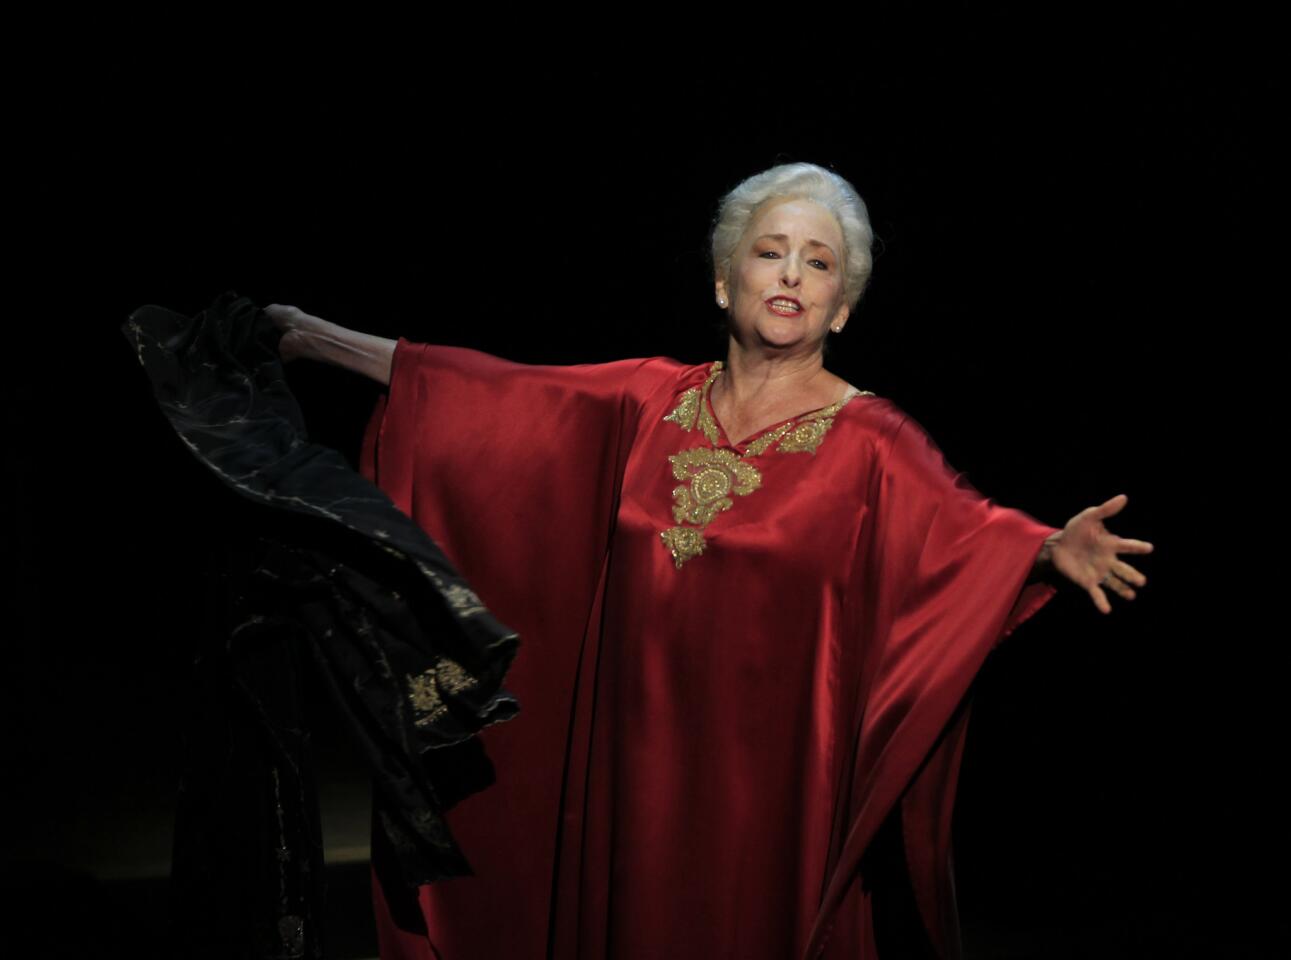 Mezzo-soprano Frederica von Stade performs Ricky Ian Gordon's "A Coffin in Egypt," which the composer wrote for her, at the Wallis Annenberg Center for the Performing Arts in Beverly Hills.